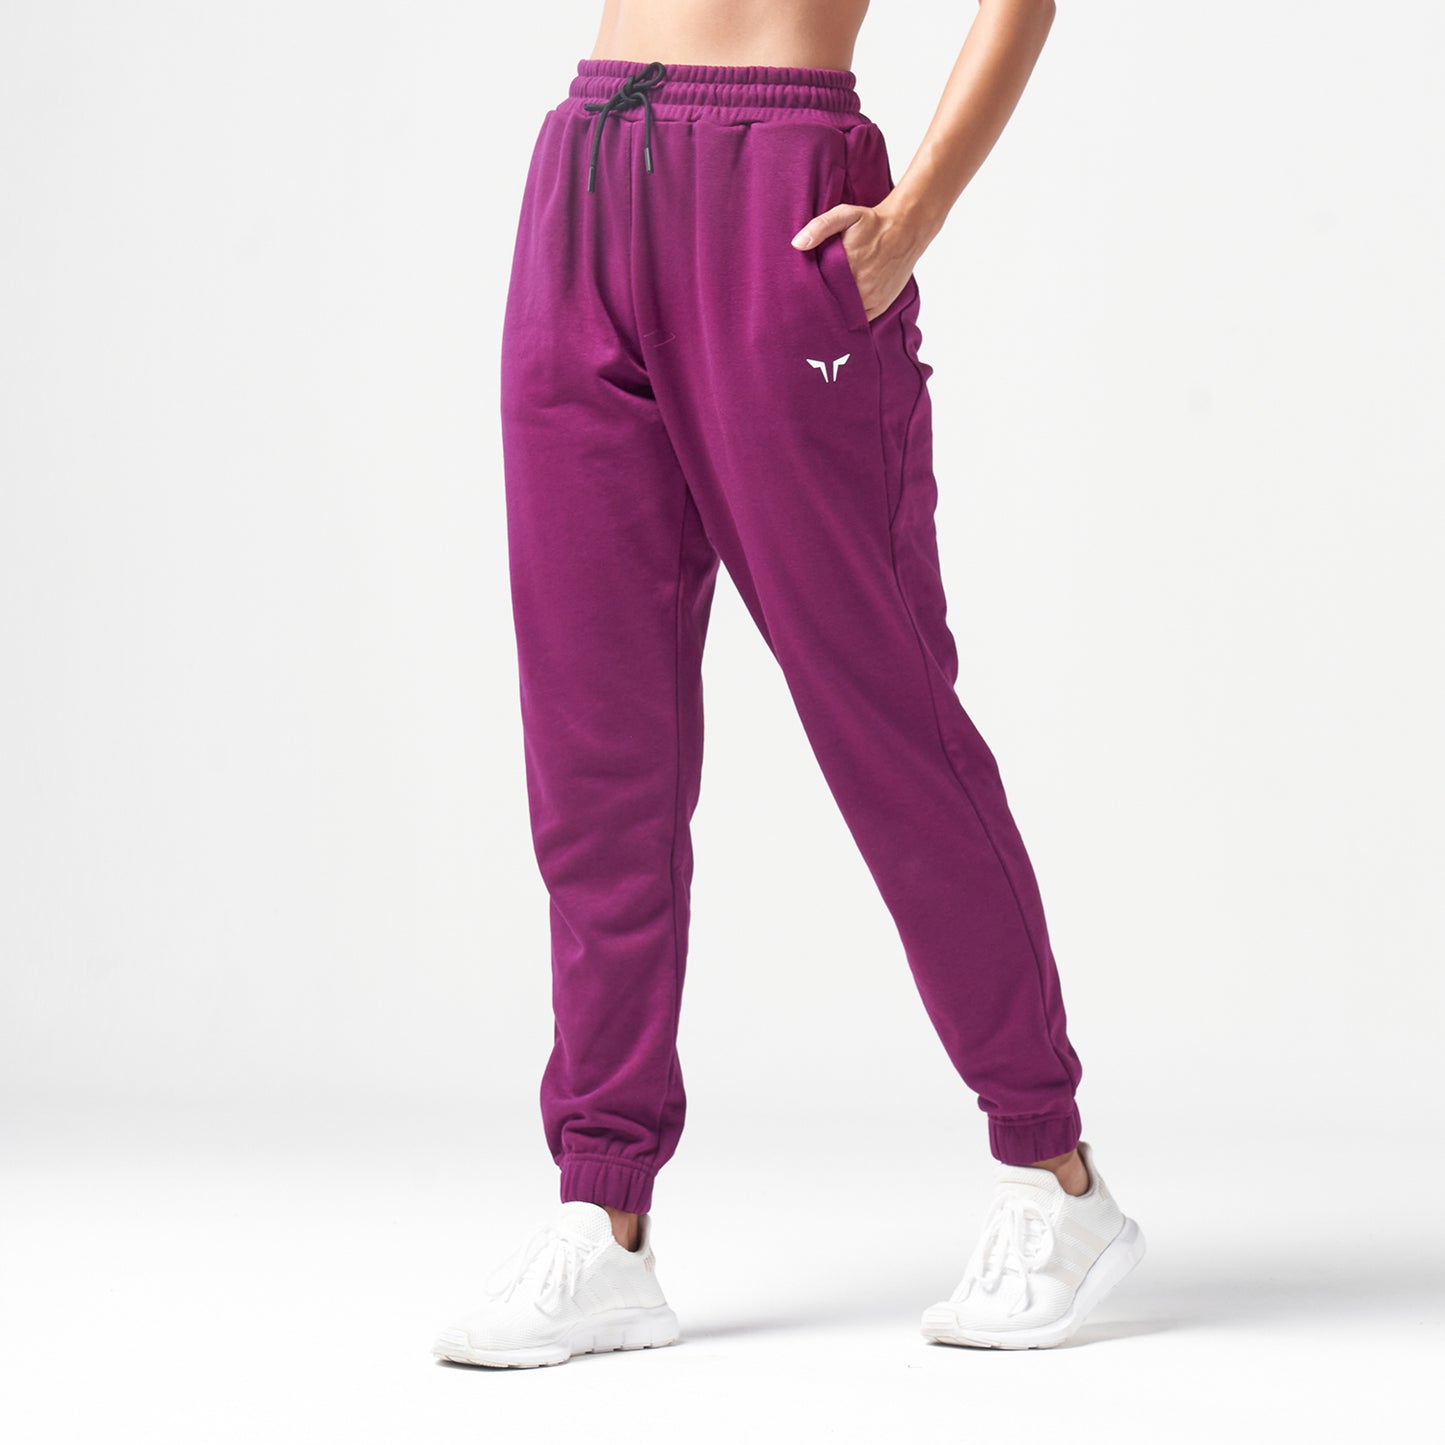 Essential Joggers - Teal | Workout Pants Women | SQUATWOLF